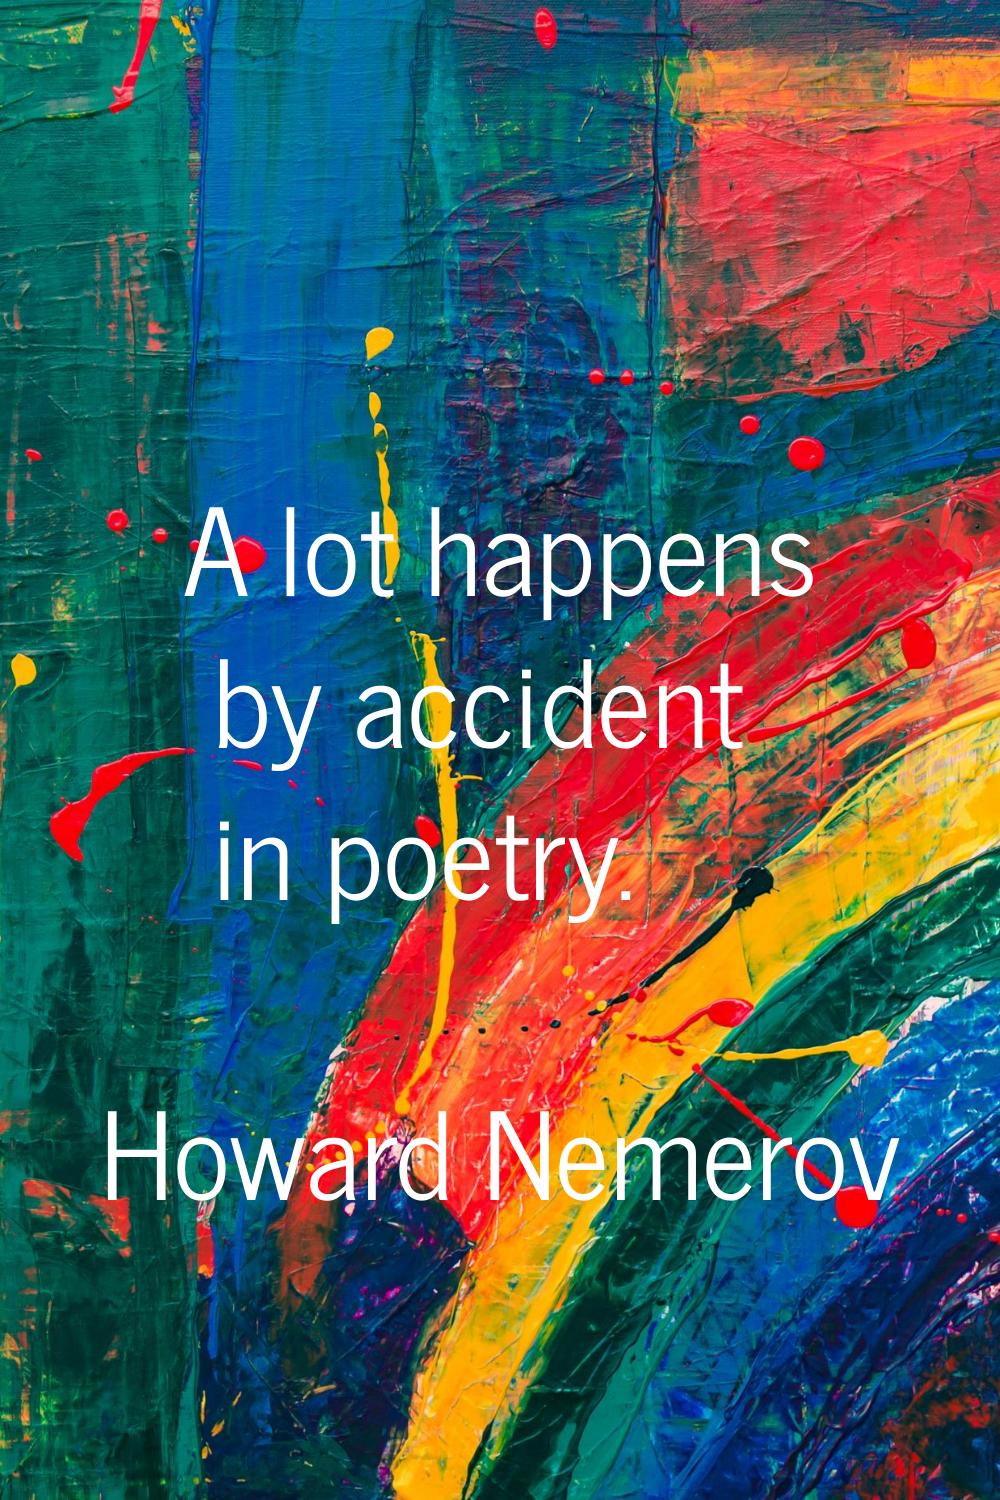 A lot happens by accident in poetry.